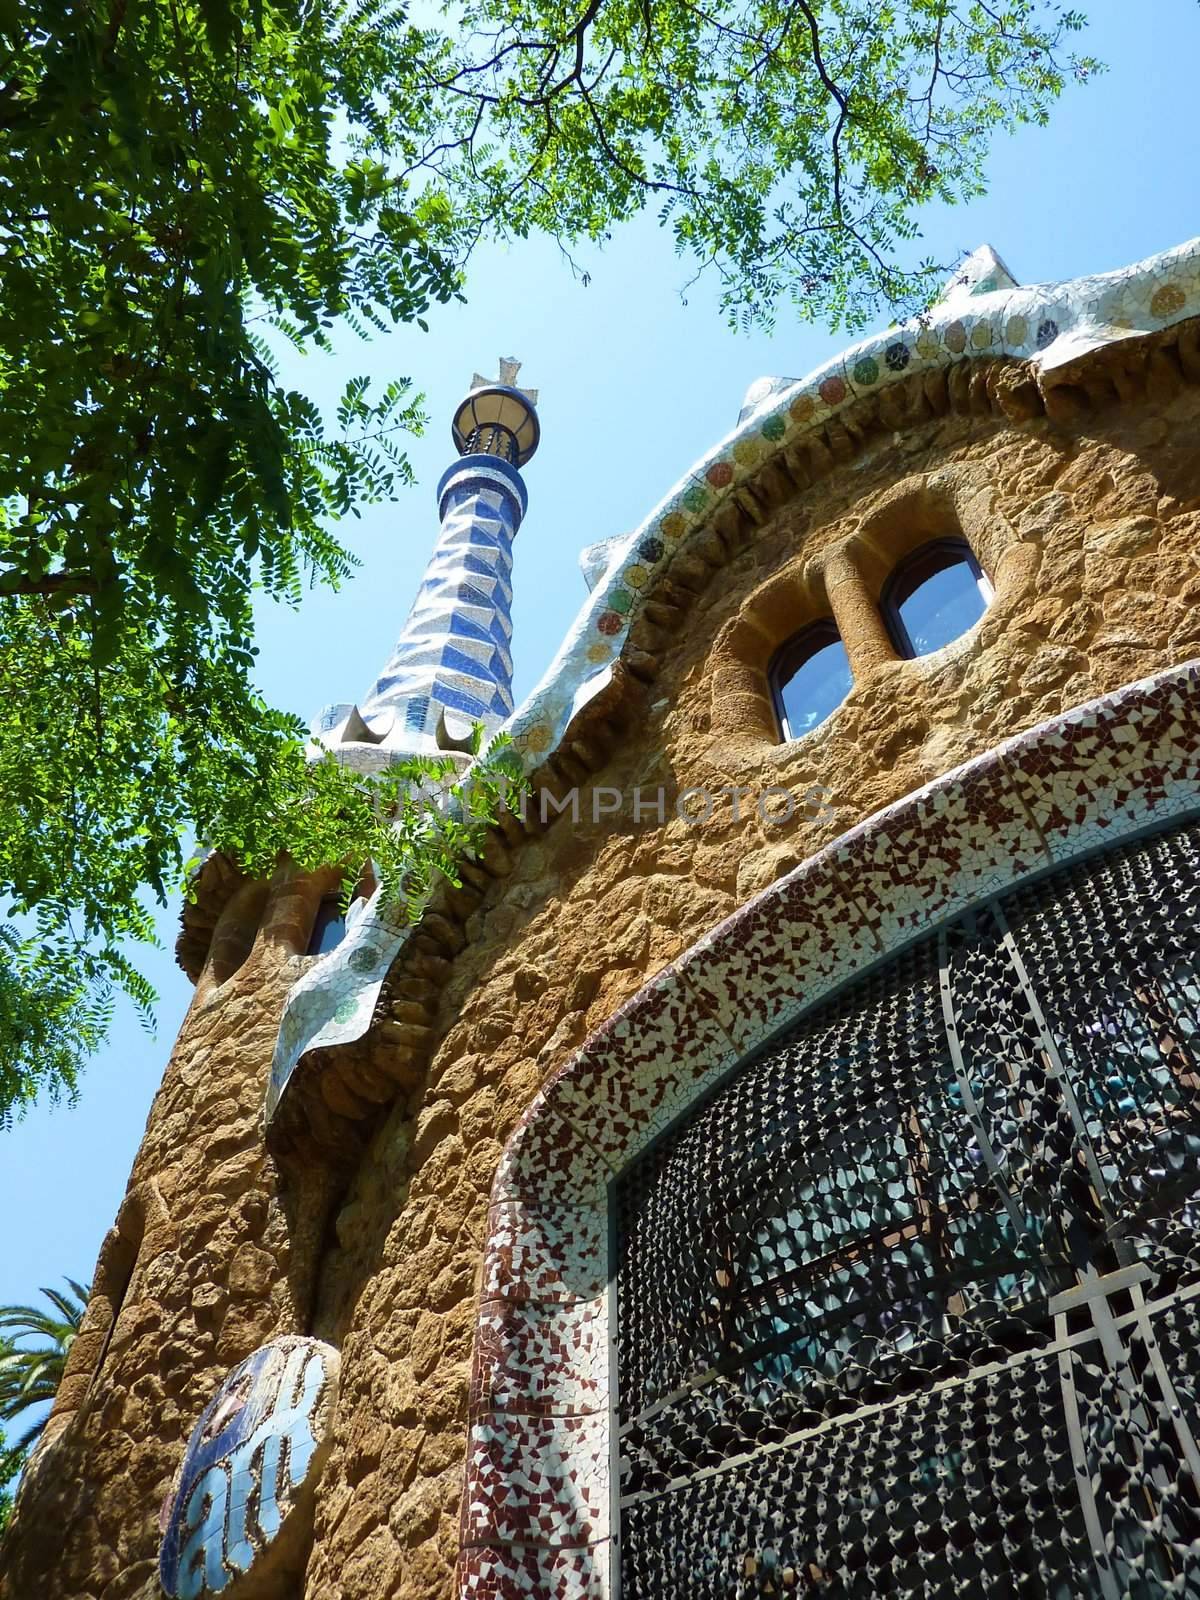 Colored facade of a house in Park Guell, Barcelona, Spain